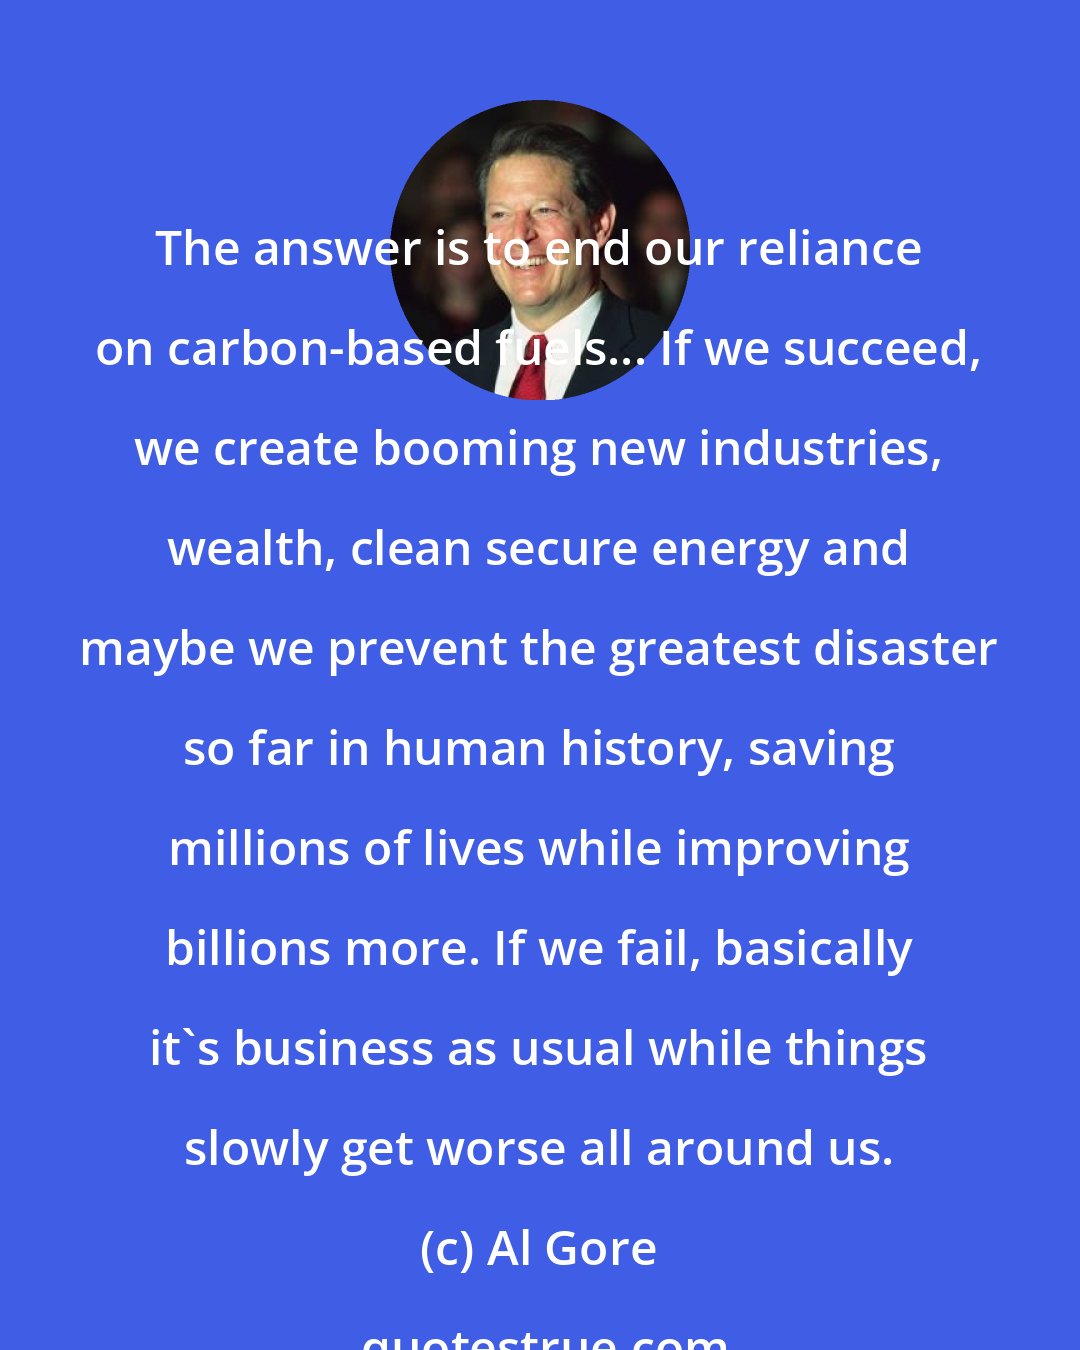 Al Gore: The answer is to end our reliance on carbon-based fuels... If we succeed, we create booming new industries, wealth, clean secure energy and maybe we prevent the greatest disaster so far in human history, saving millions of lives while improving billions more. If we fail, basically it's business as usual while things slowly get worse all around us.